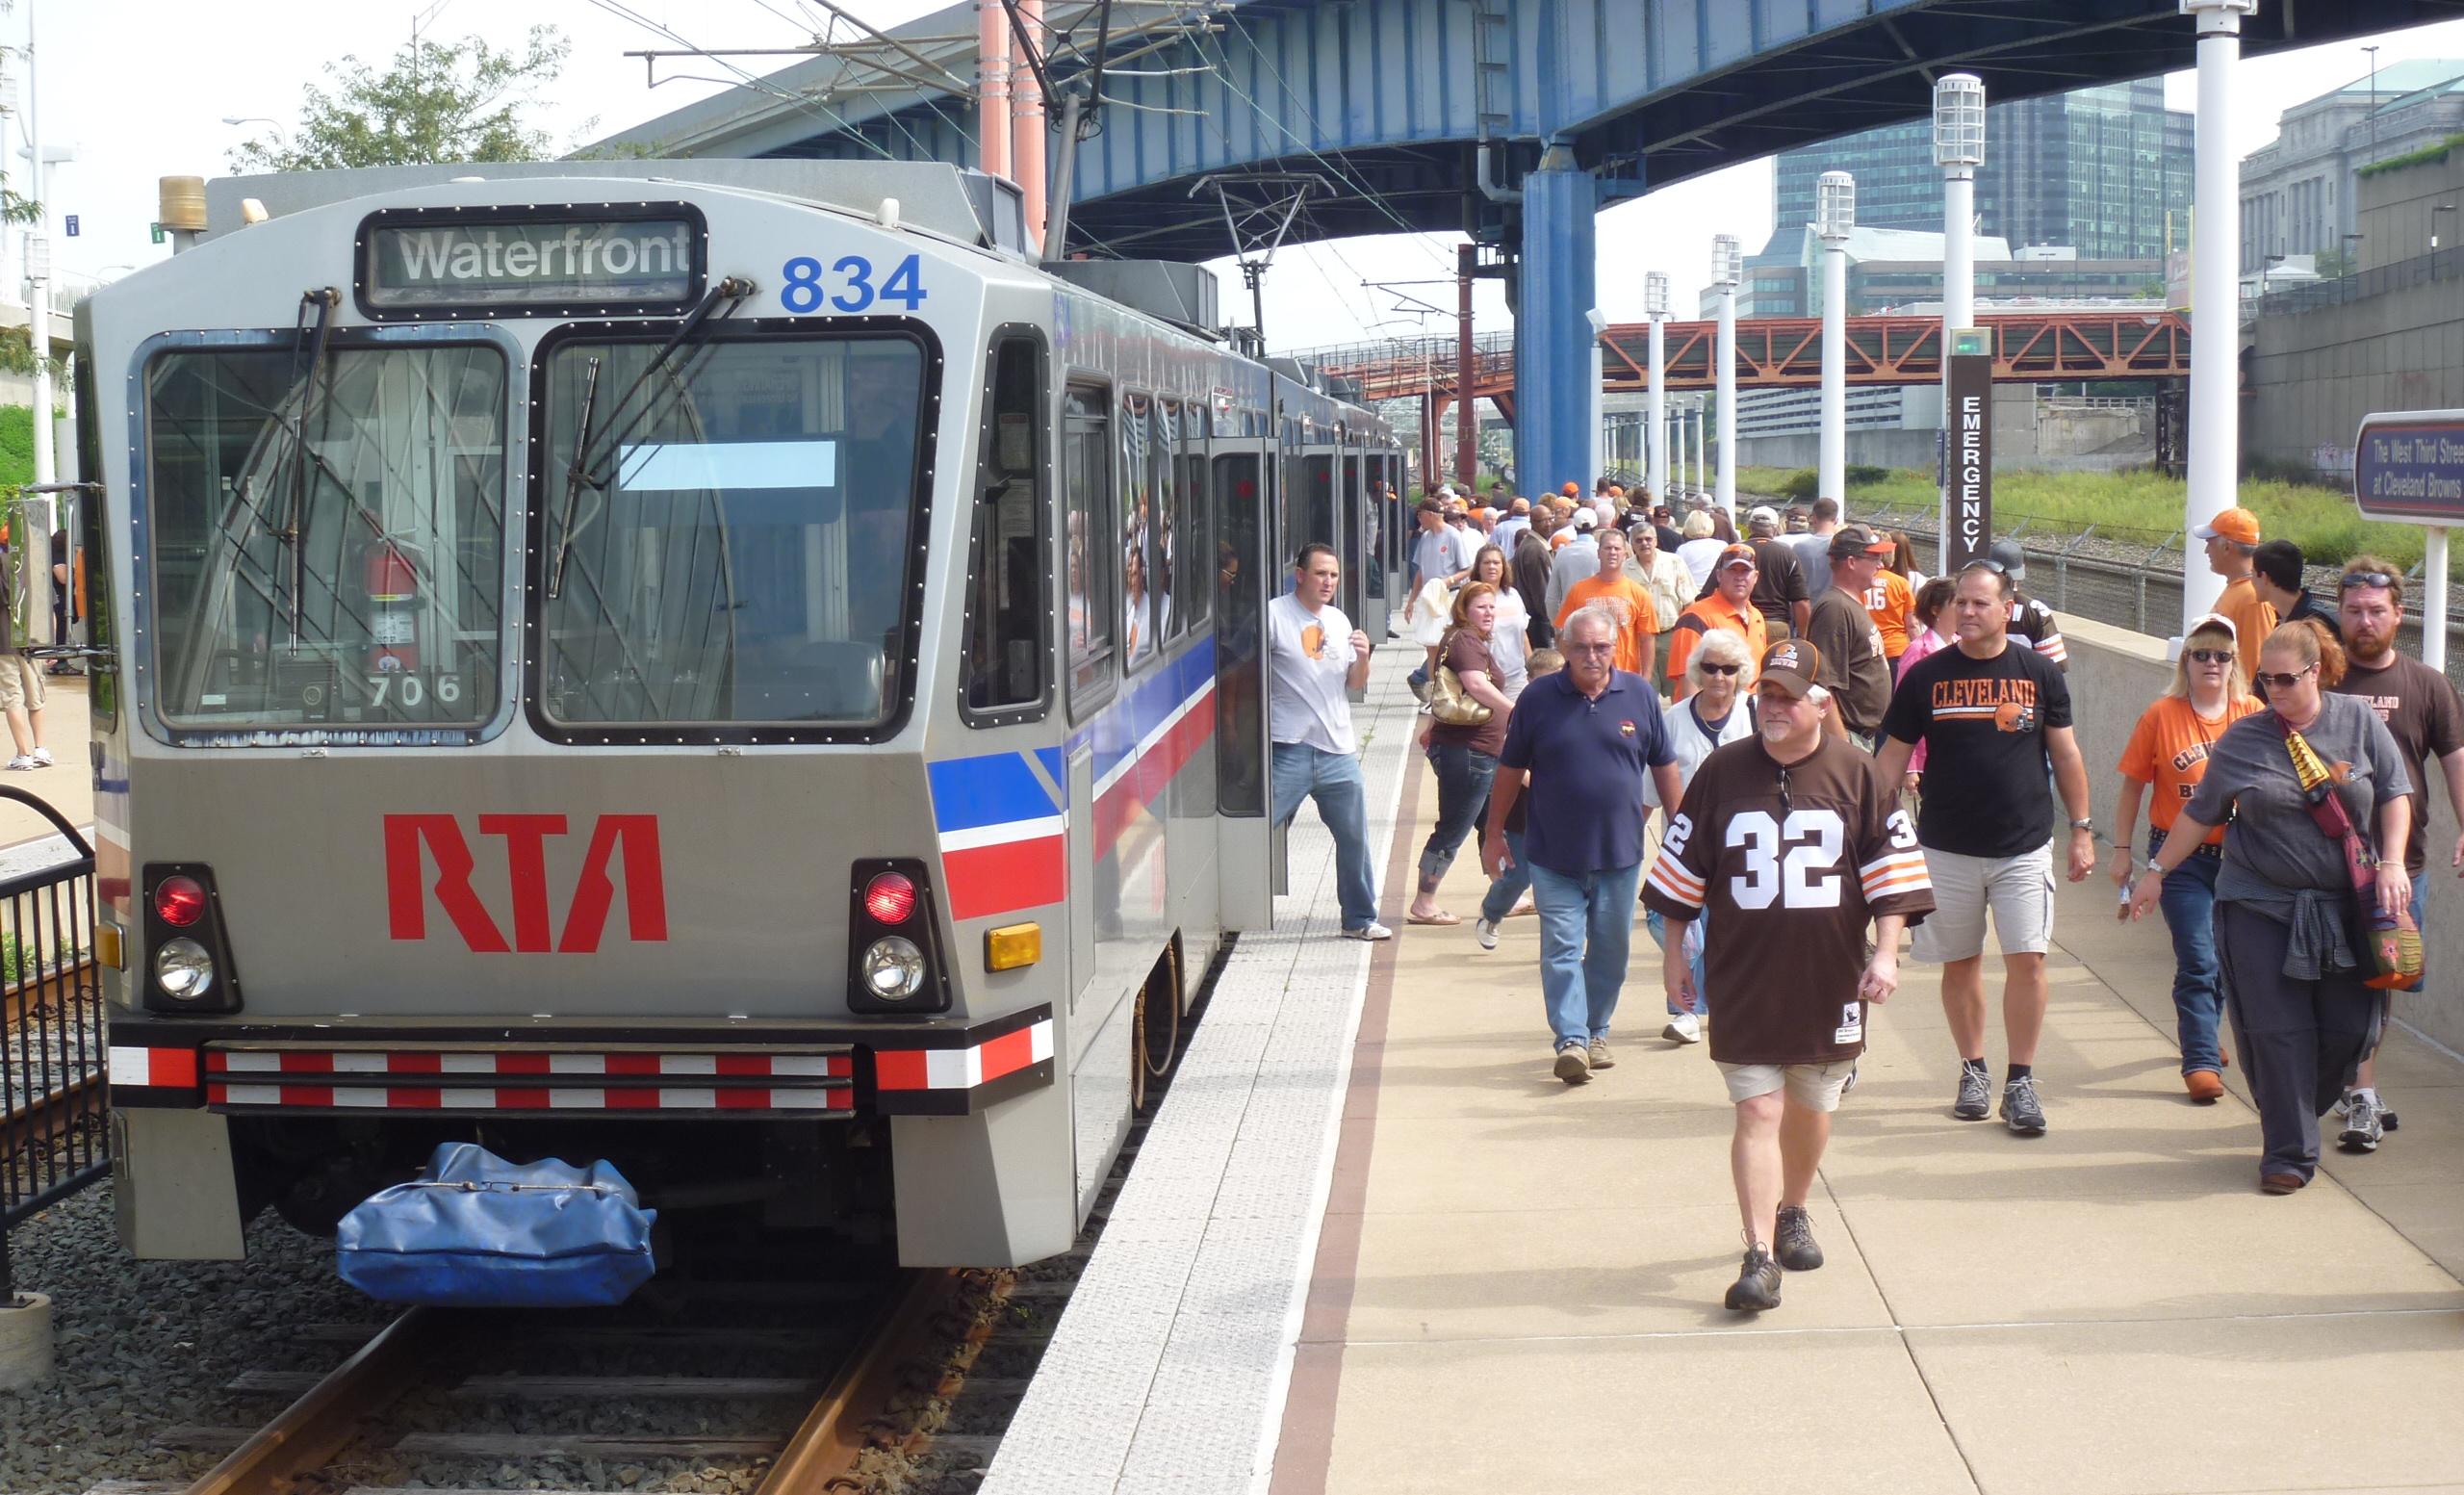  Dec 10: Ride the Waterfront Line to see the Browns play the Packers at 1 p.m.